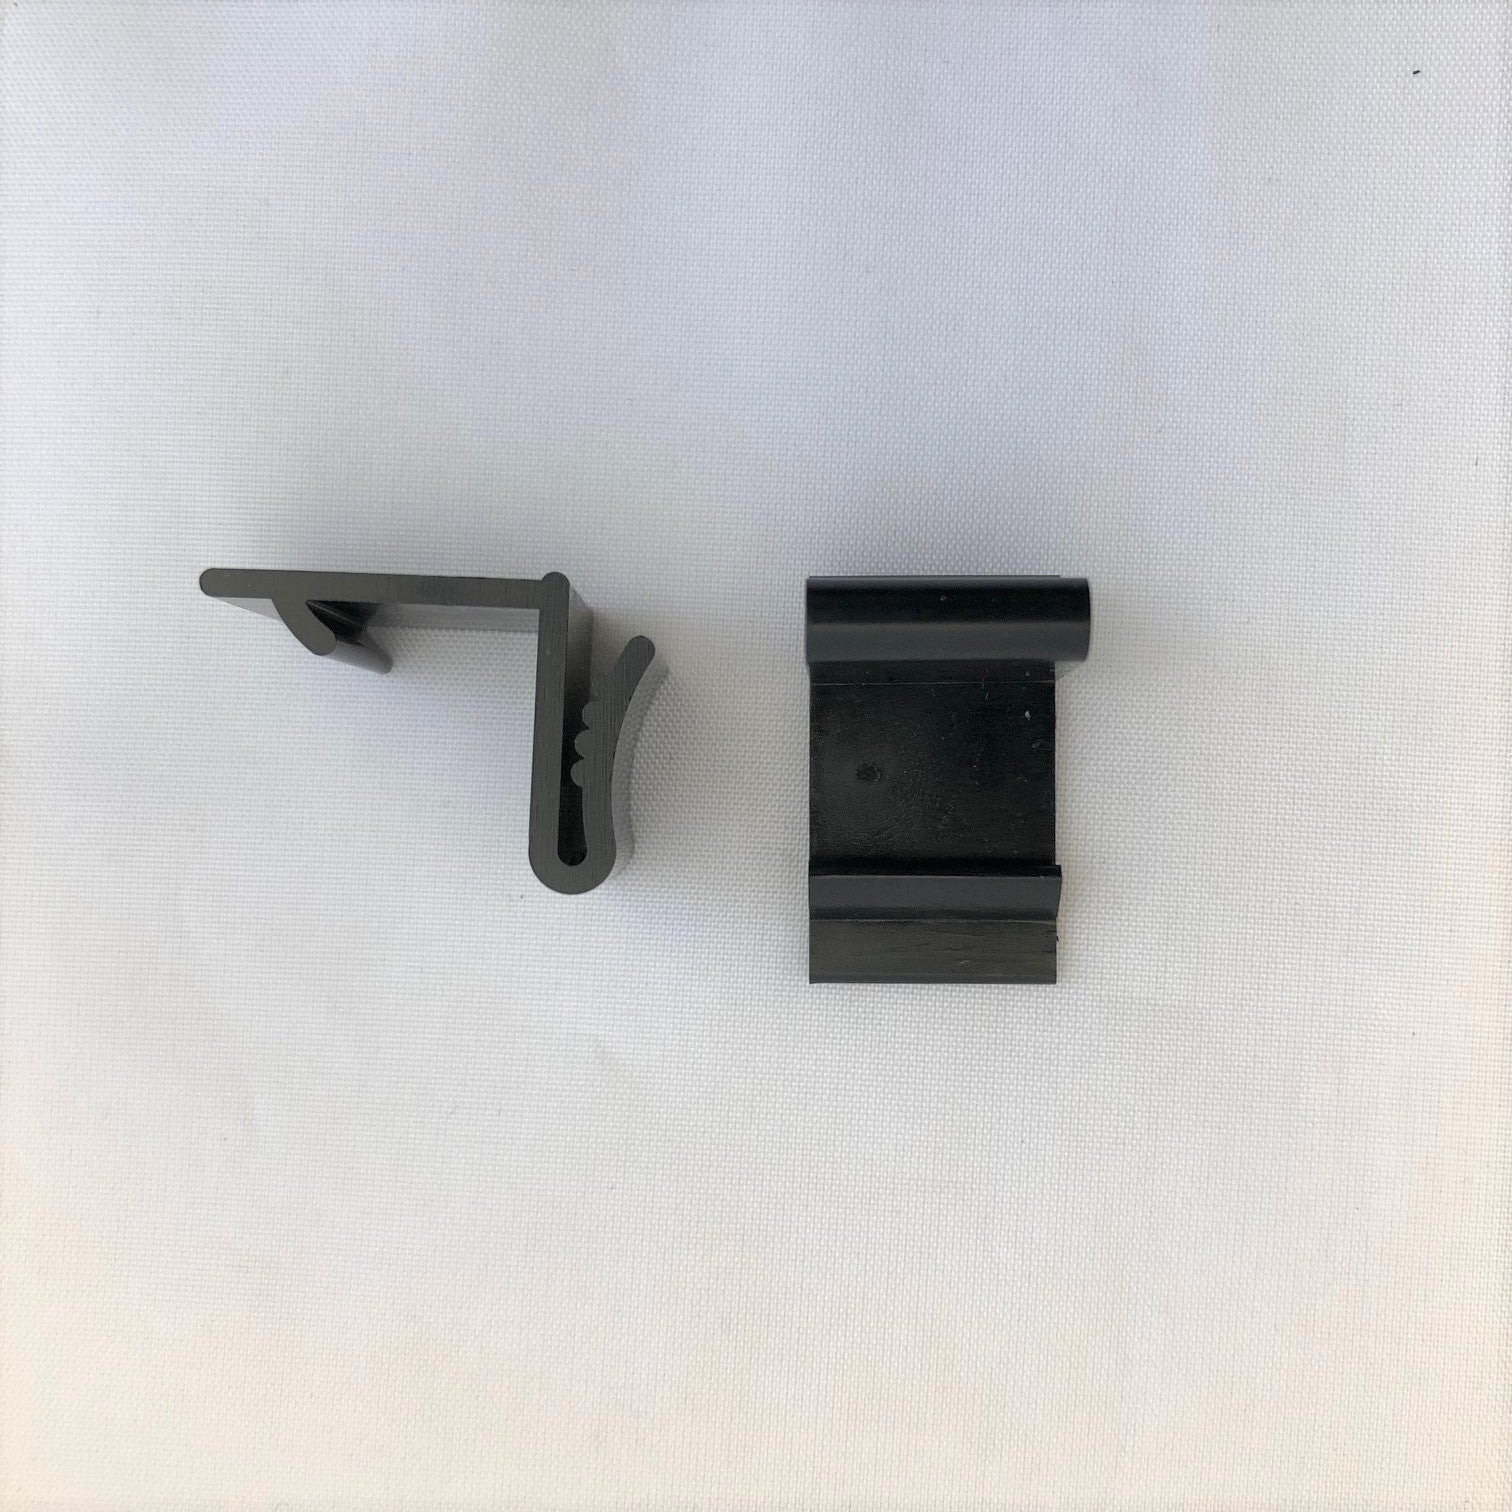 Flyscreen retaining clips - suits Capral extrusions - sold in packs of 10